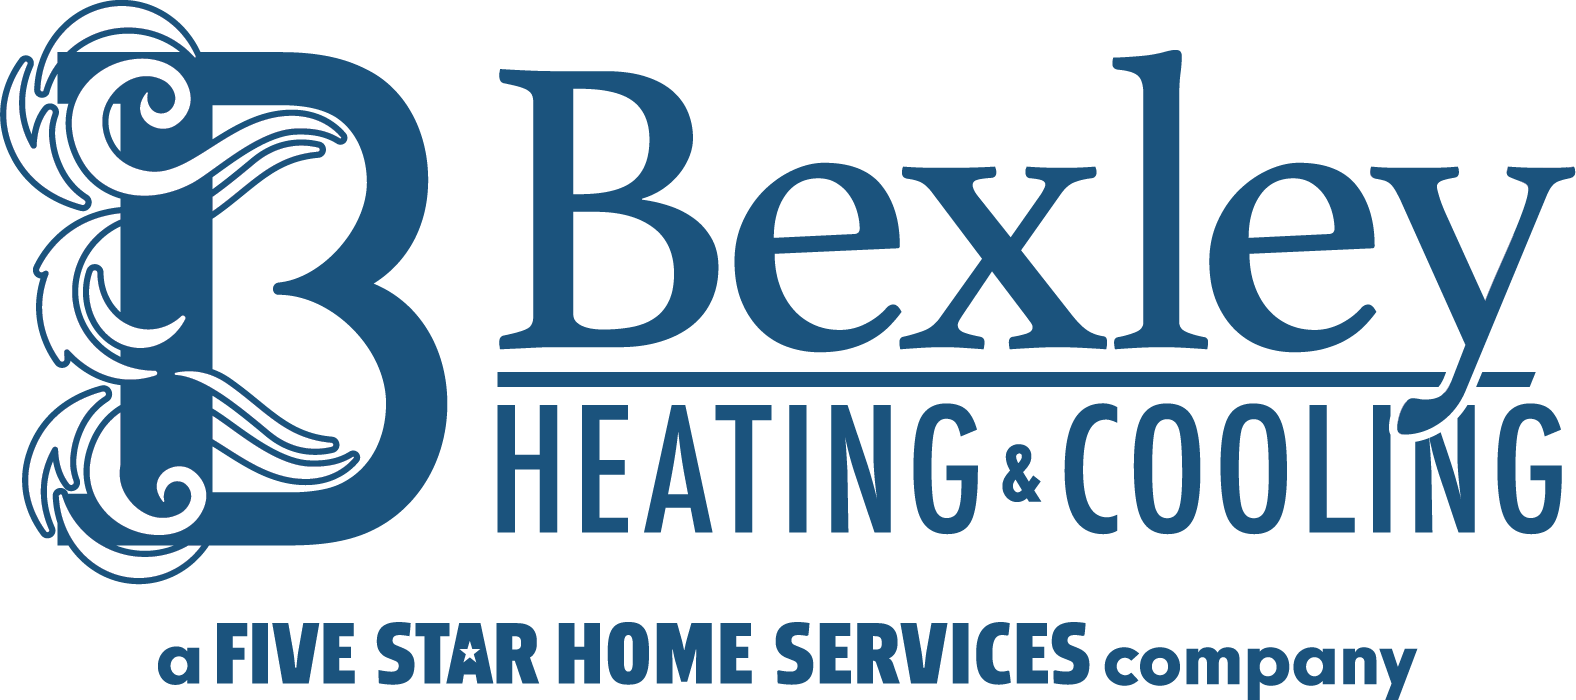 Bexley Heating & Cooling